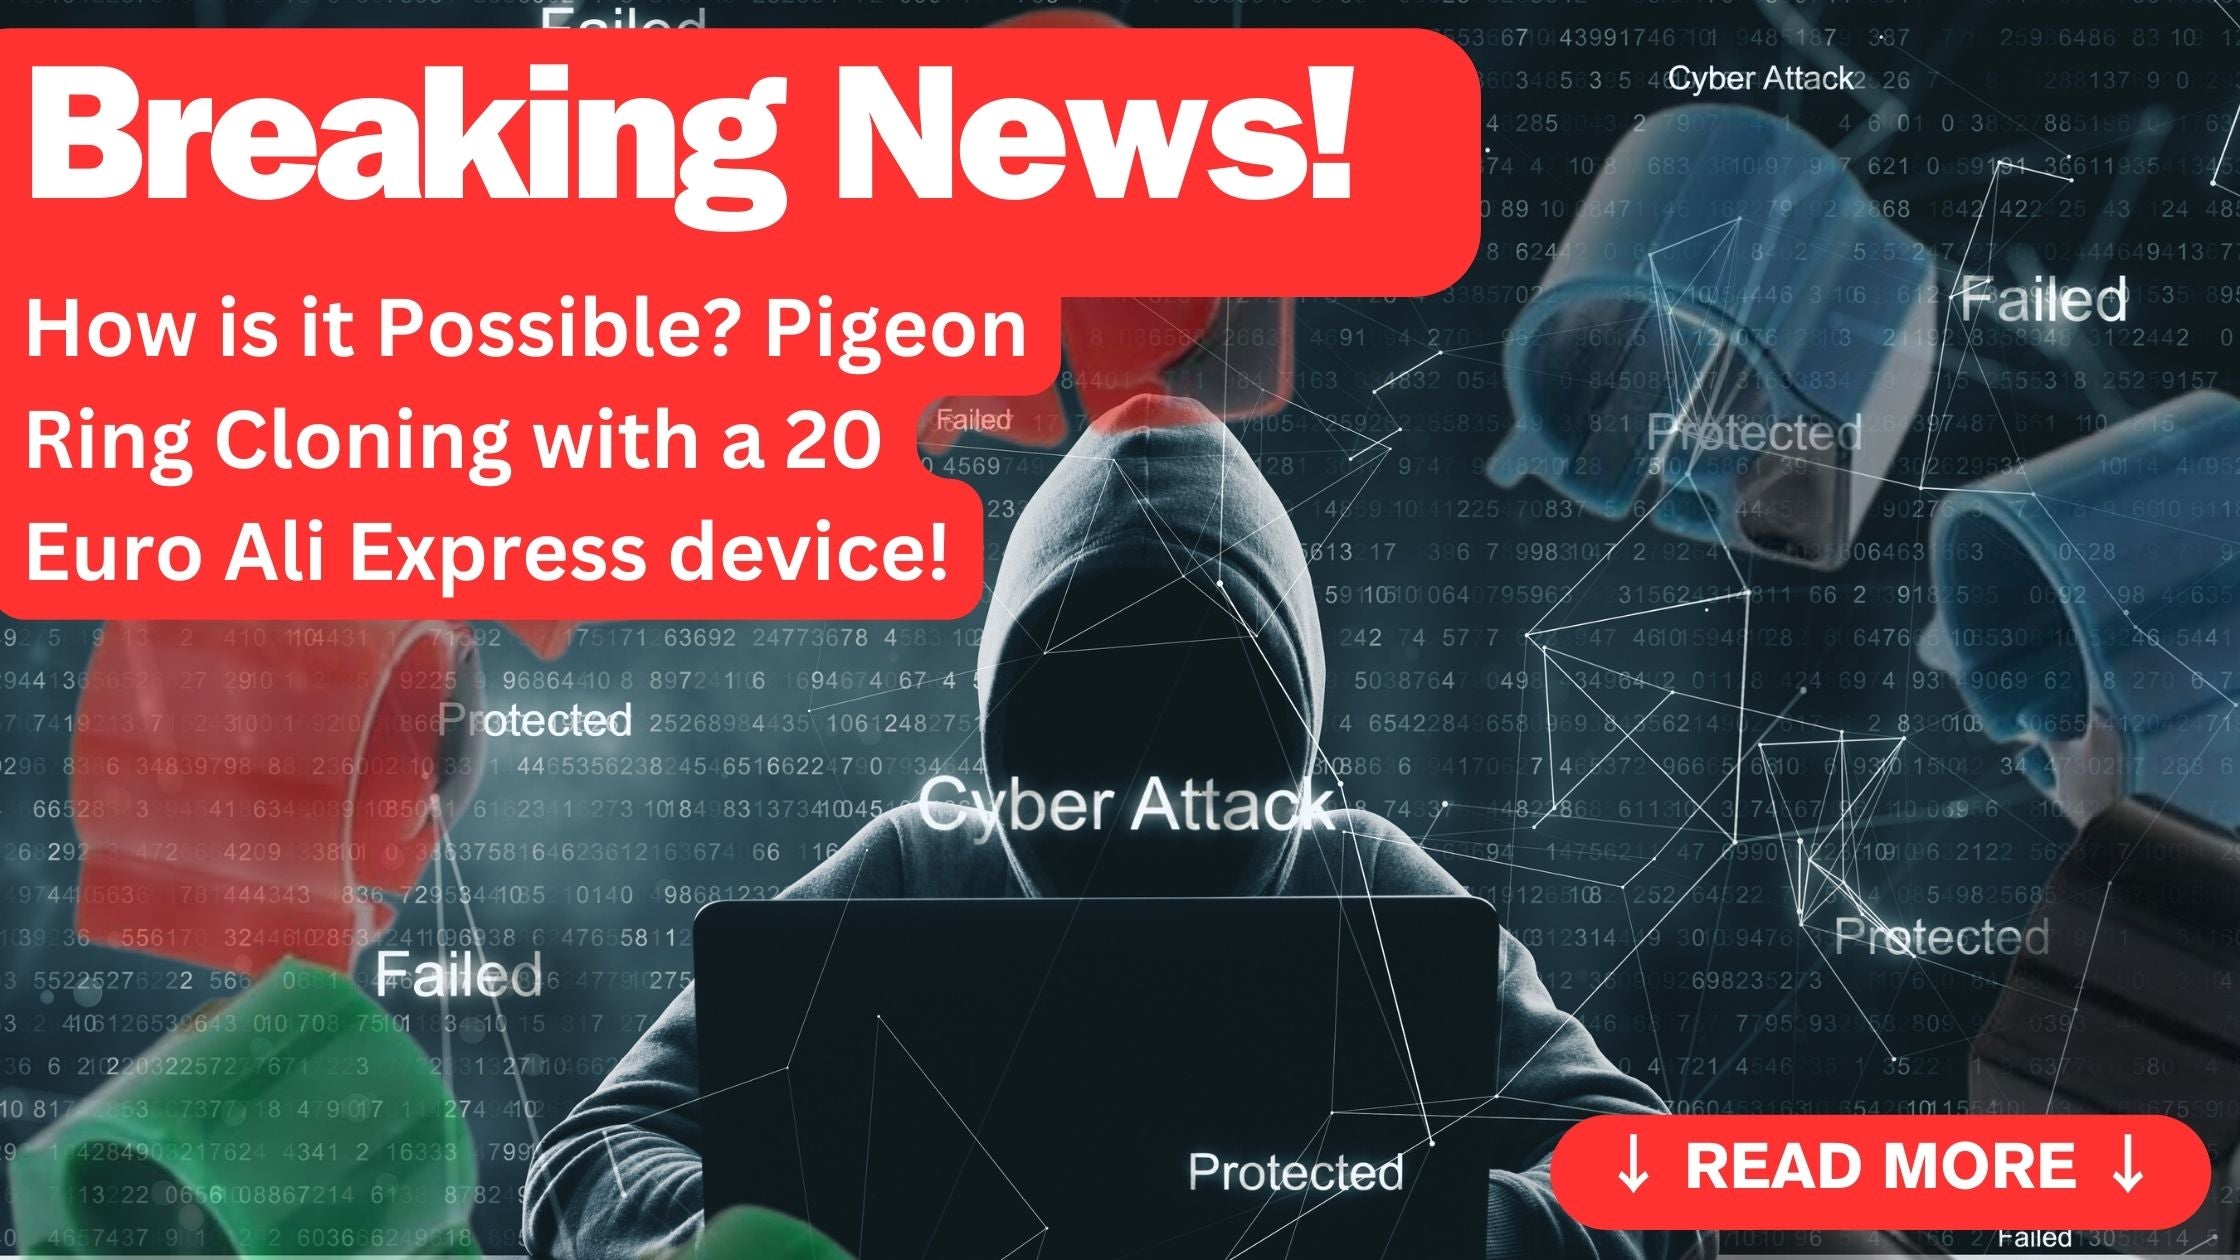 How is it Possible? Pigeon Ring Cloning with a 20 Euro Ali Express device